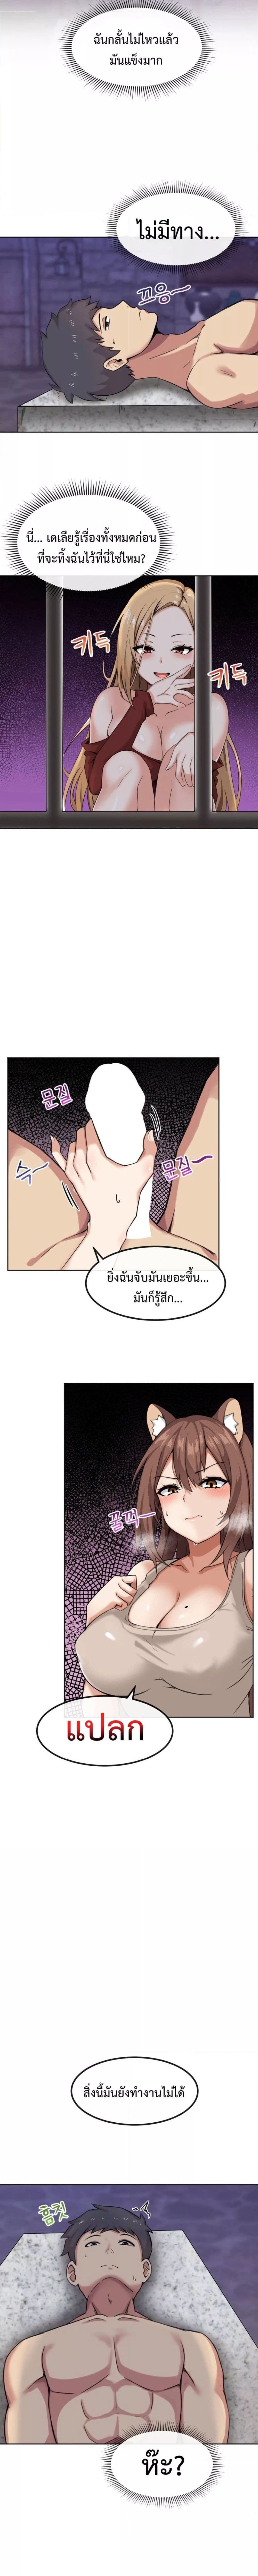 Meat Doll Workshop in Another World ตอนที่ 2 ภาพ 1